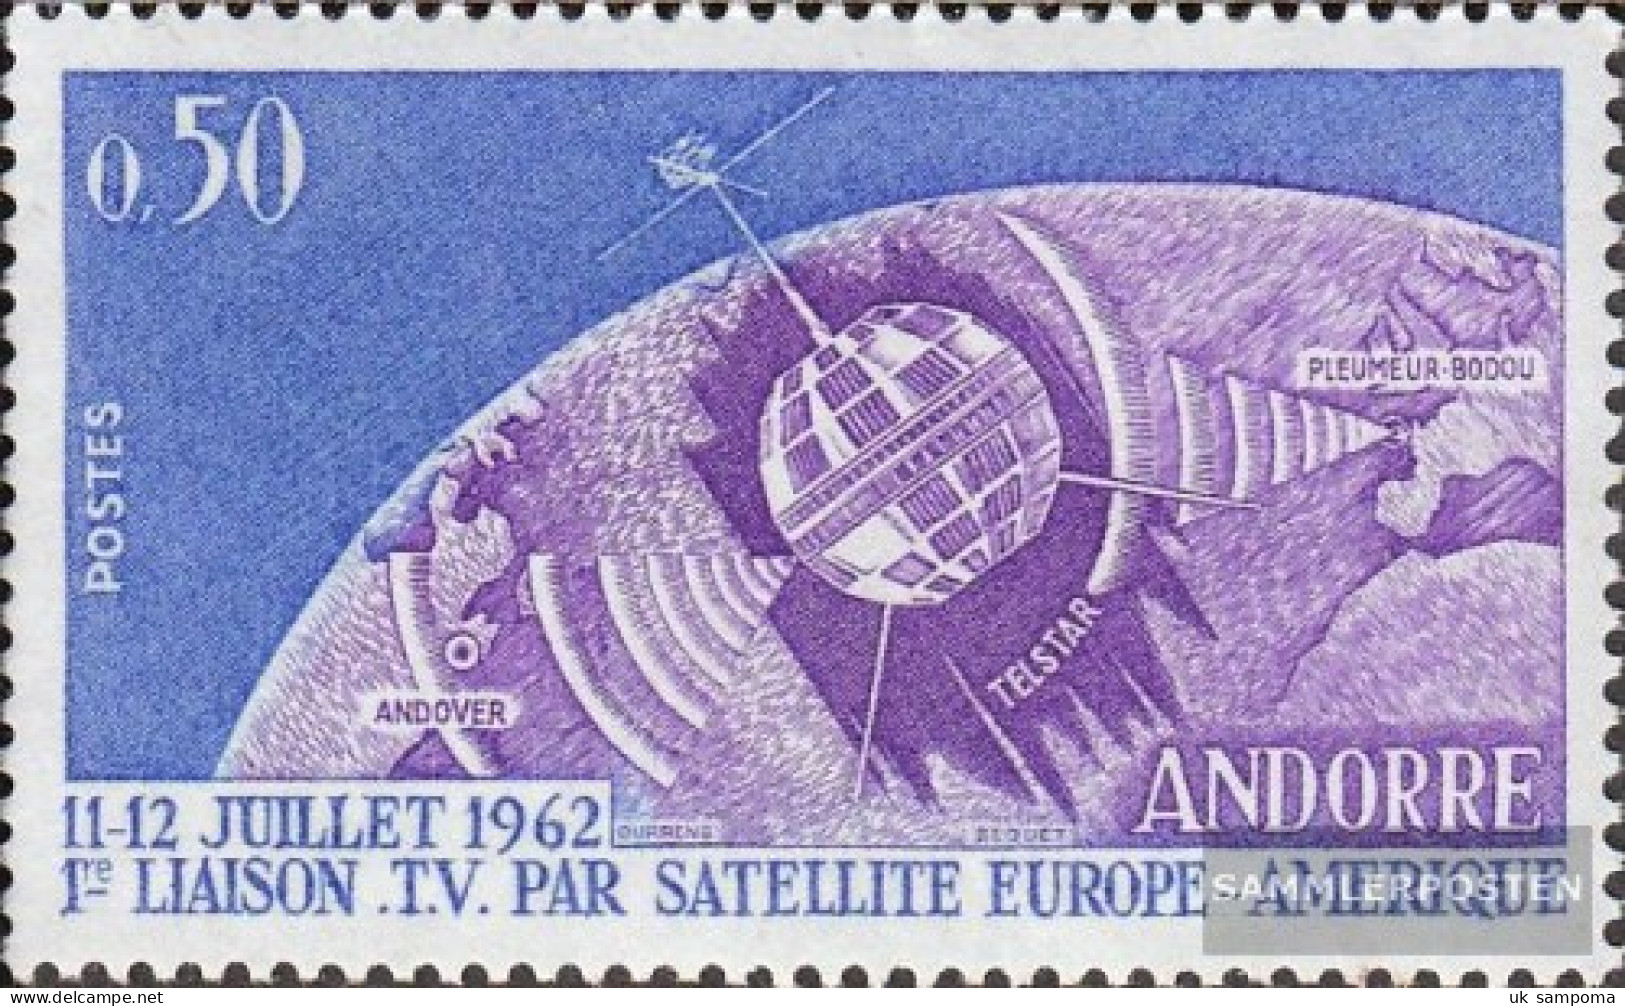 Andorra - French Post 178 (complete Issue) Volume 1962 Completeett Unmounted Mint / Never Hinged 1962 Satellite TV - Booklets